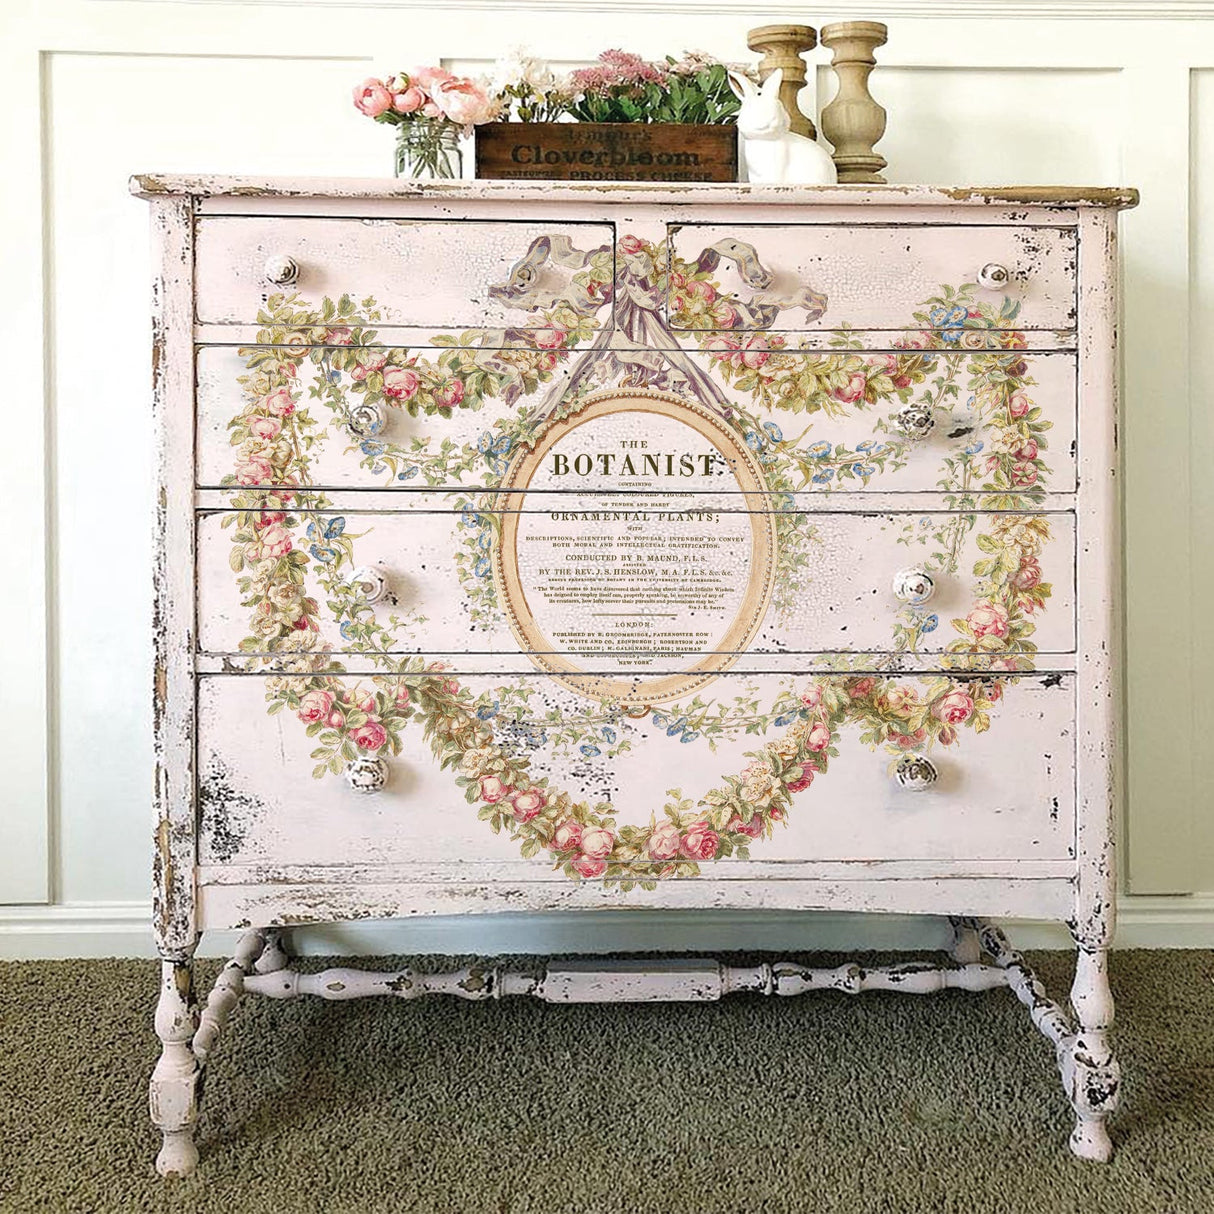 IOD The Botanist Decor Transfer by Iron Orchid Designs